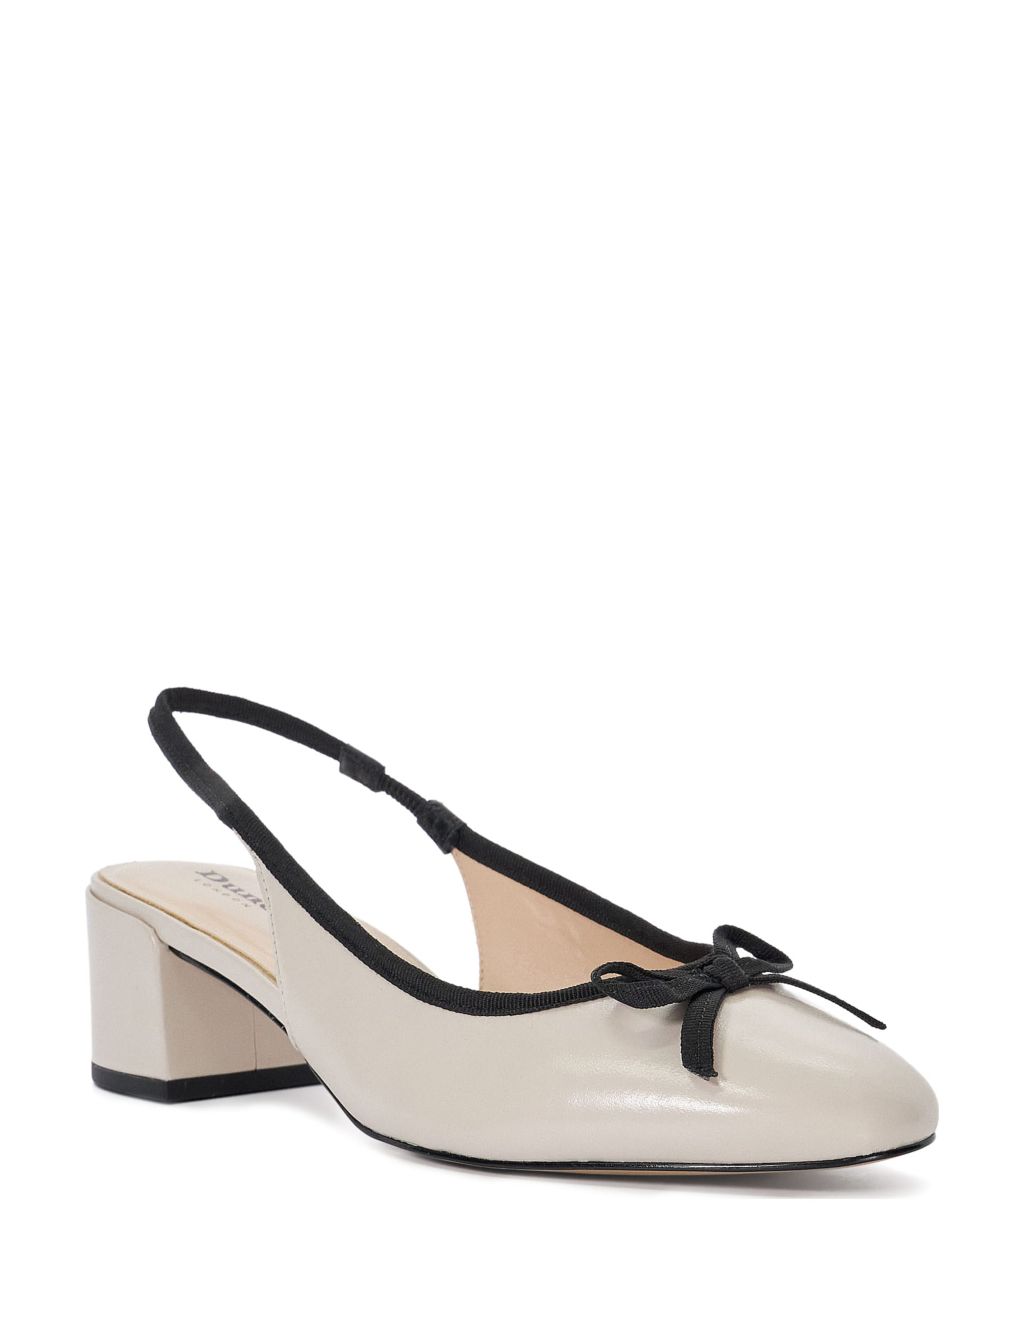 Leather Patent Block Heel Slingback Shoes 2 of 5